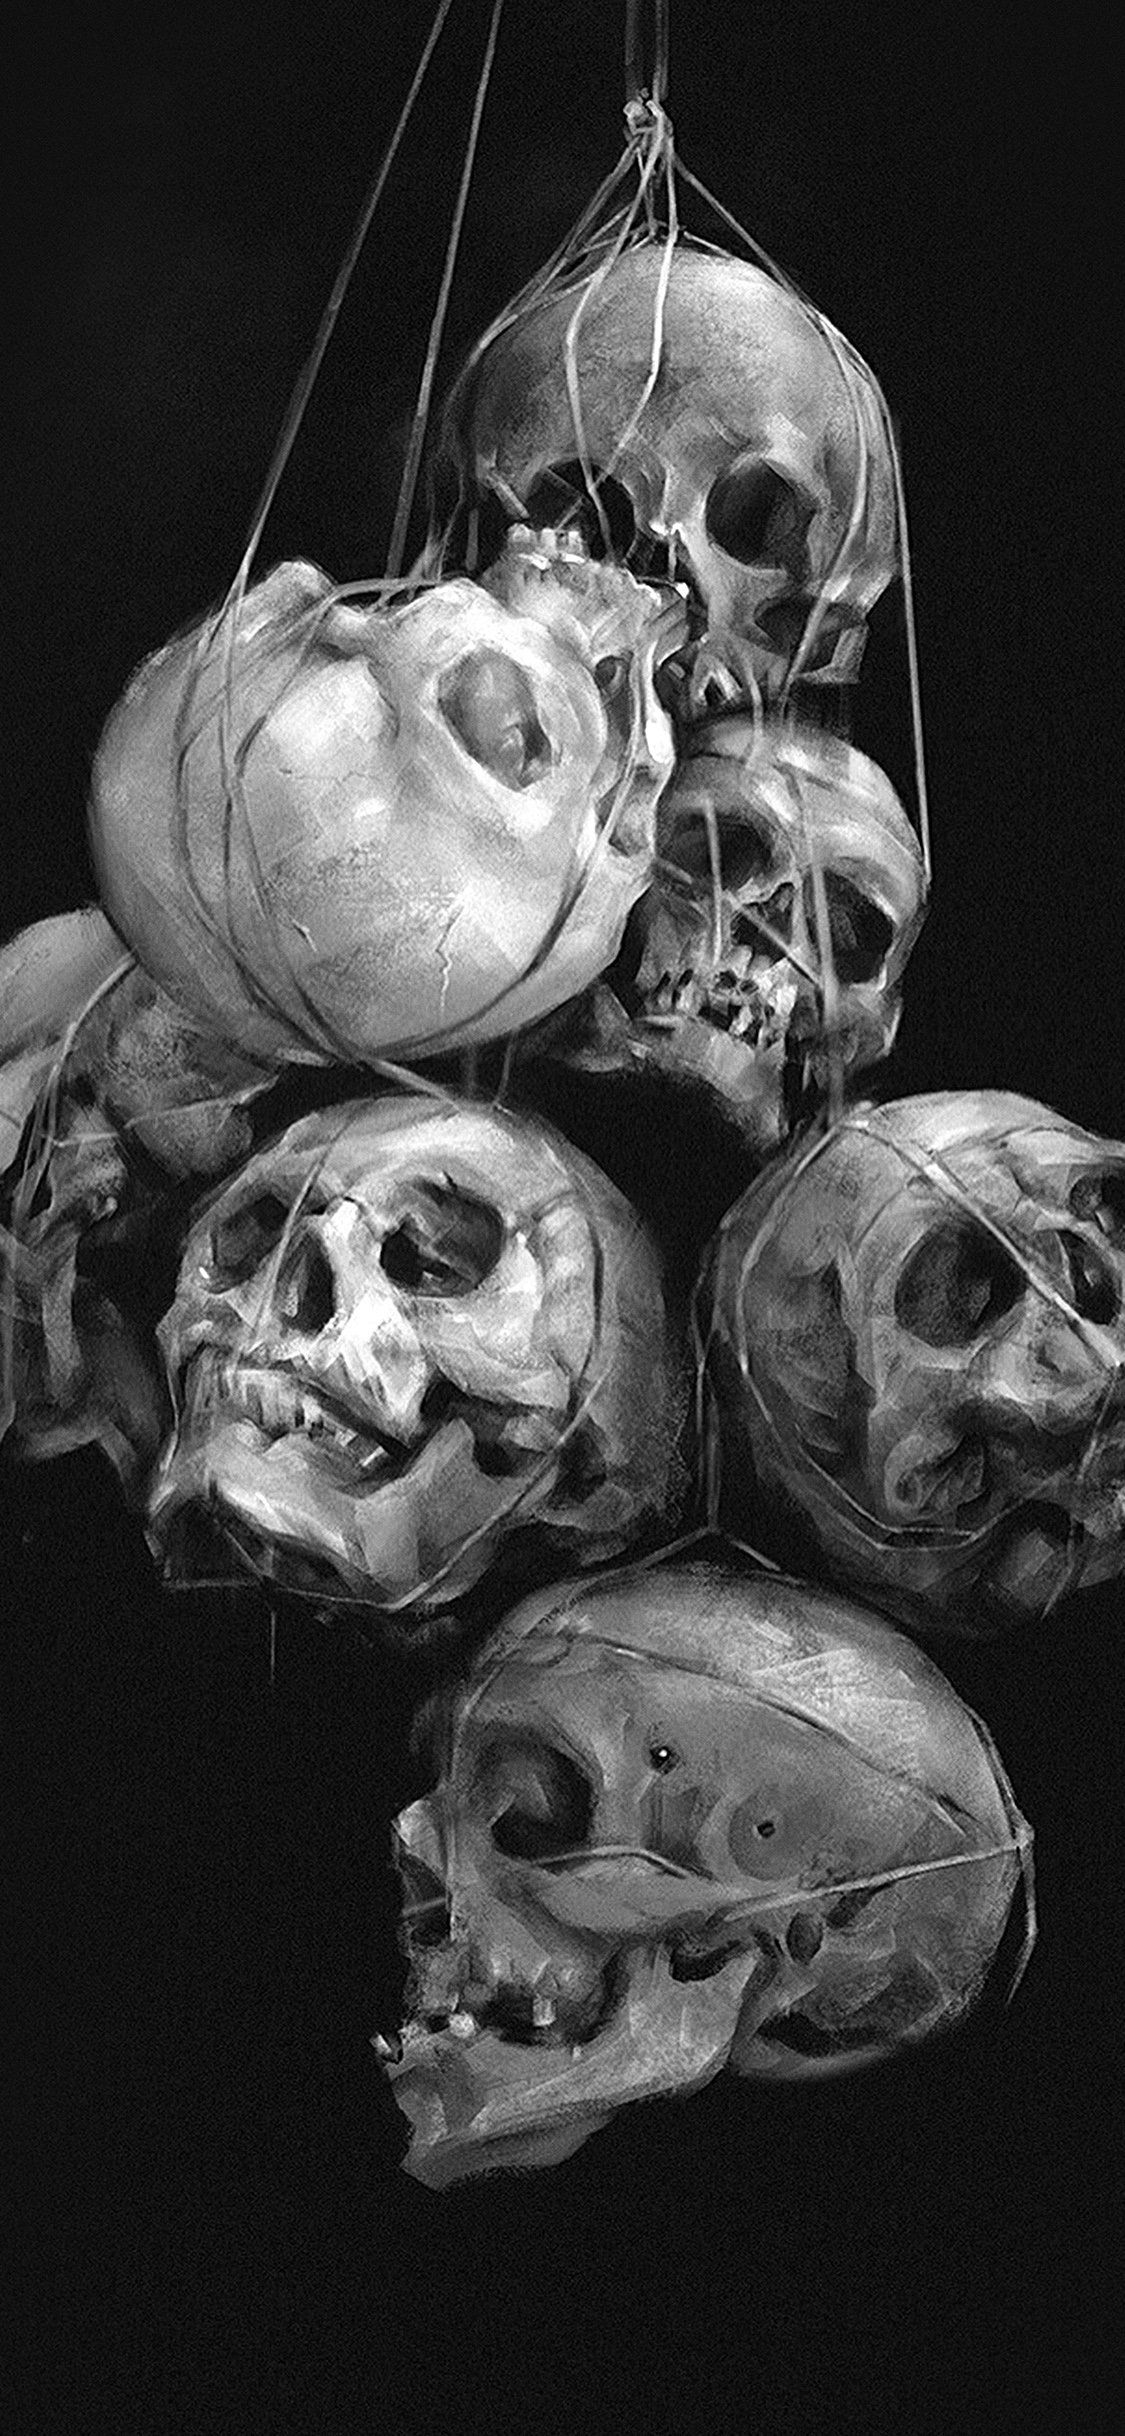 Black and white image of a collection of skulls hanging from strings. - Skull